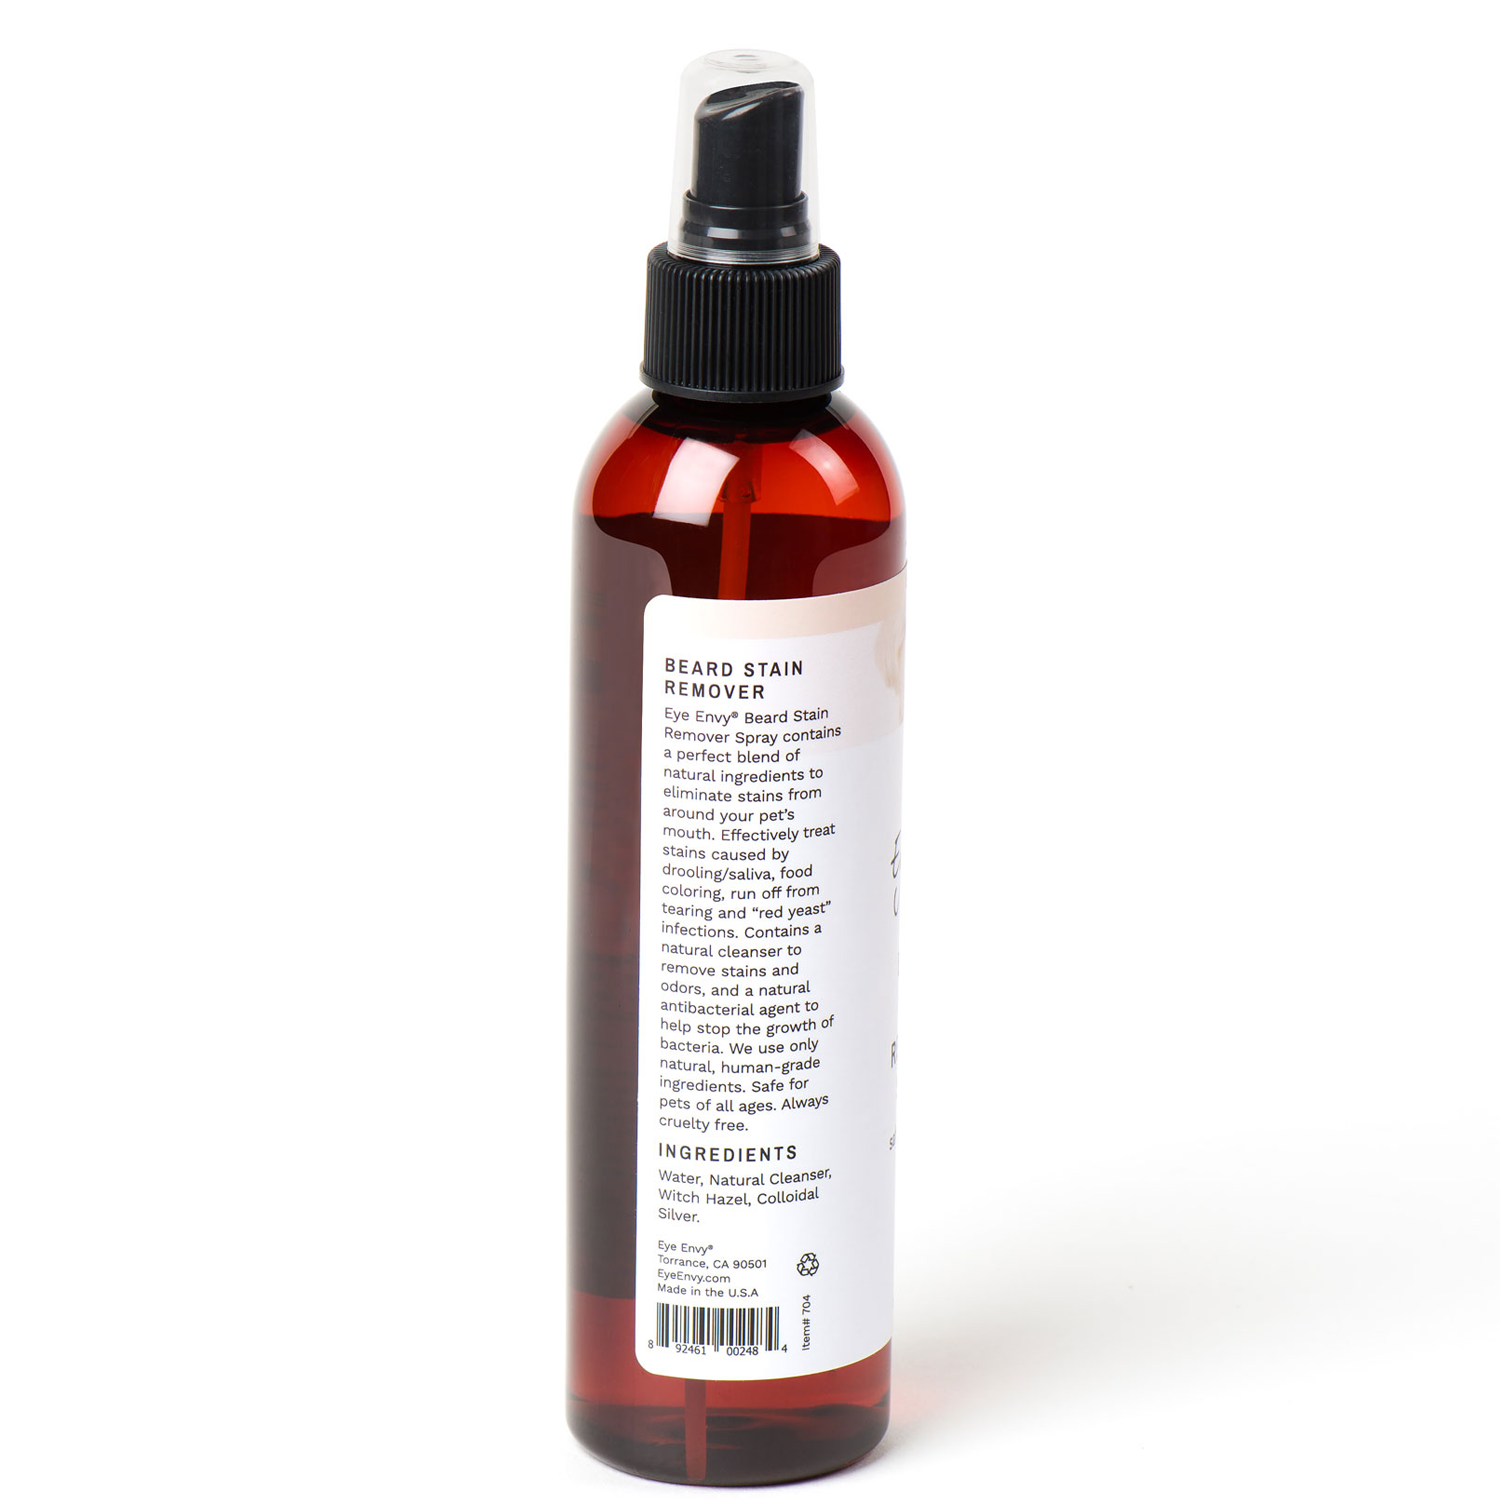 Pet Boutique - Dog Grooming - Eye Envy - Beard Stain Remover Spray